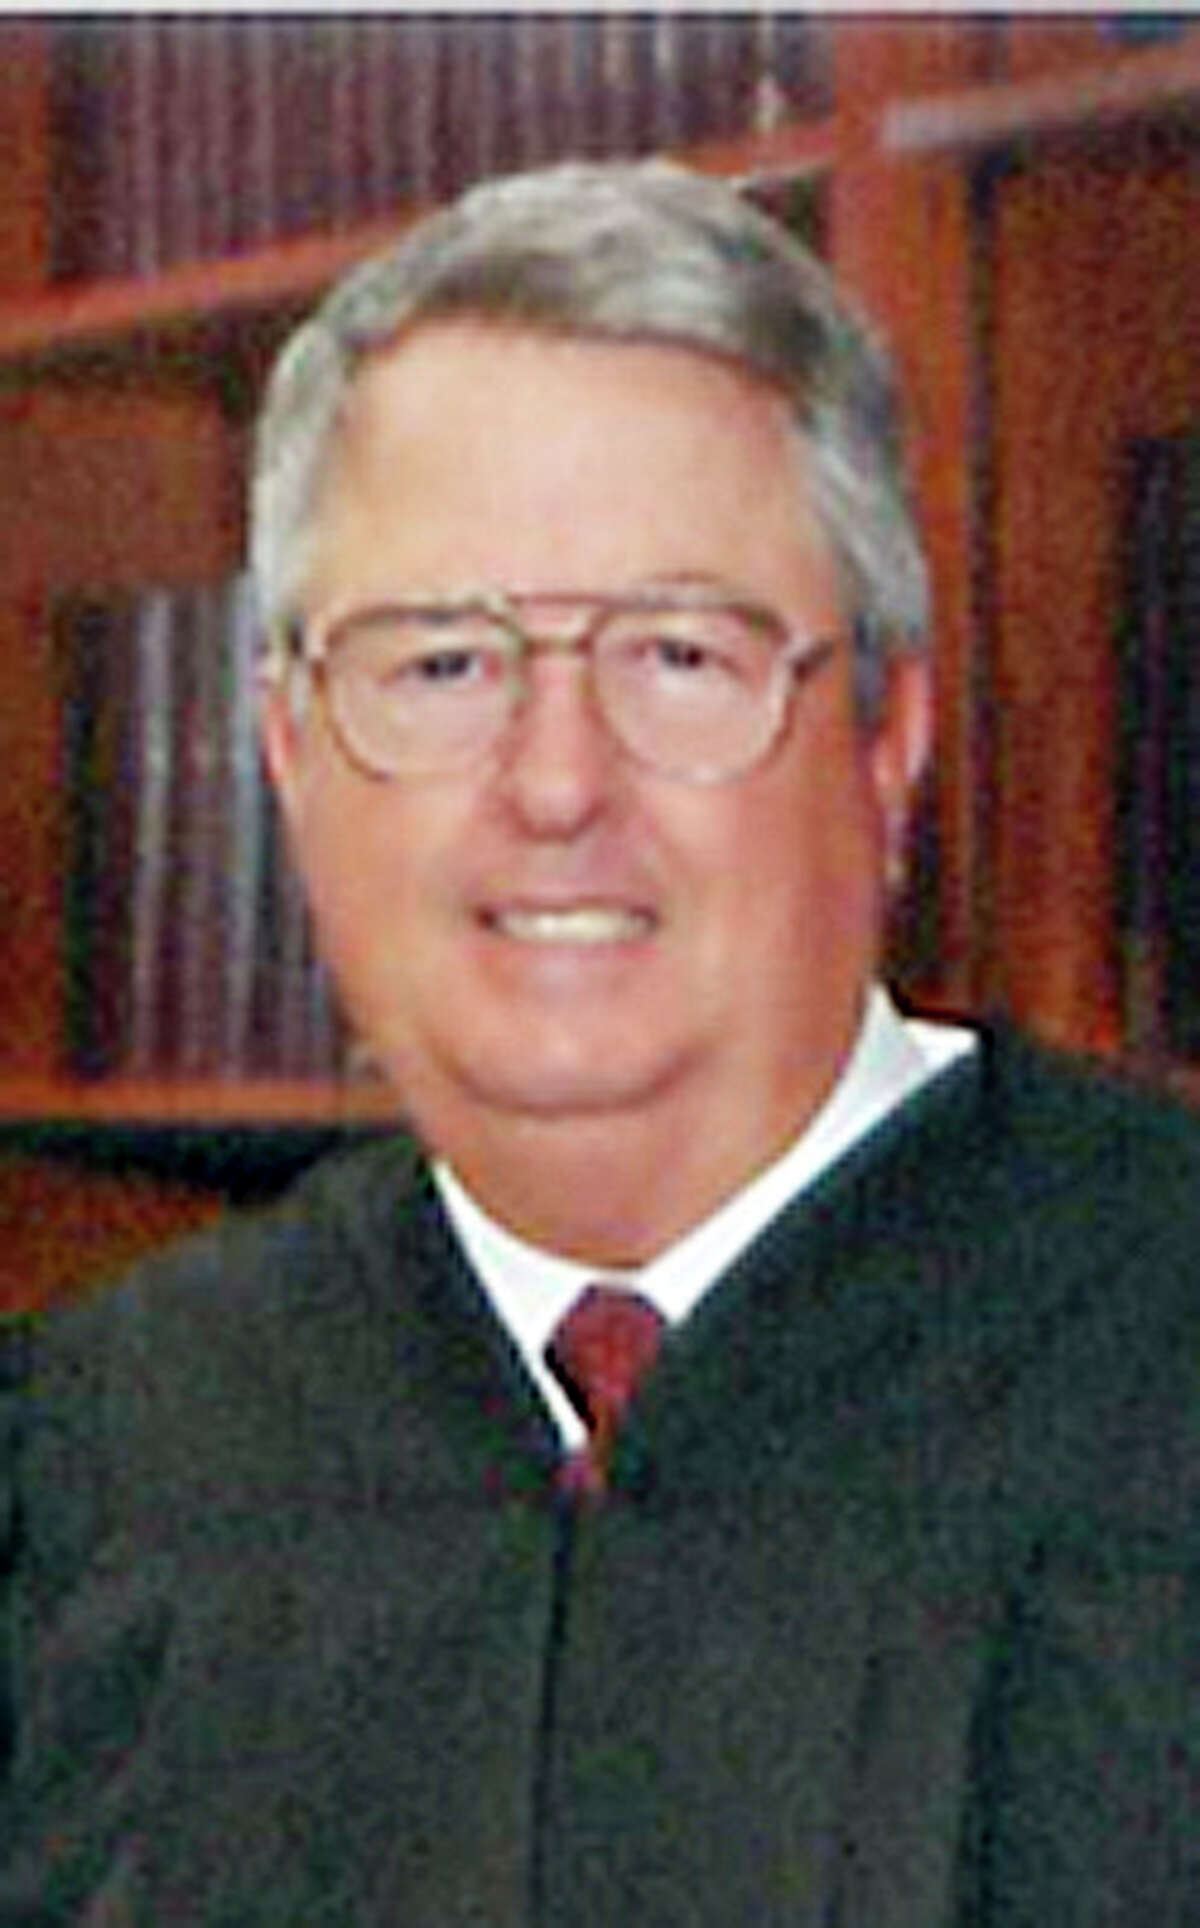 Hand out photo of Judge Sam Sparks who became the second recipient of the Sandra Day O'Connor Jurist Award in September. CREDIT: Courtesy of American College of Trial Lawyers. Received 11/15/10 for 1122achievements.